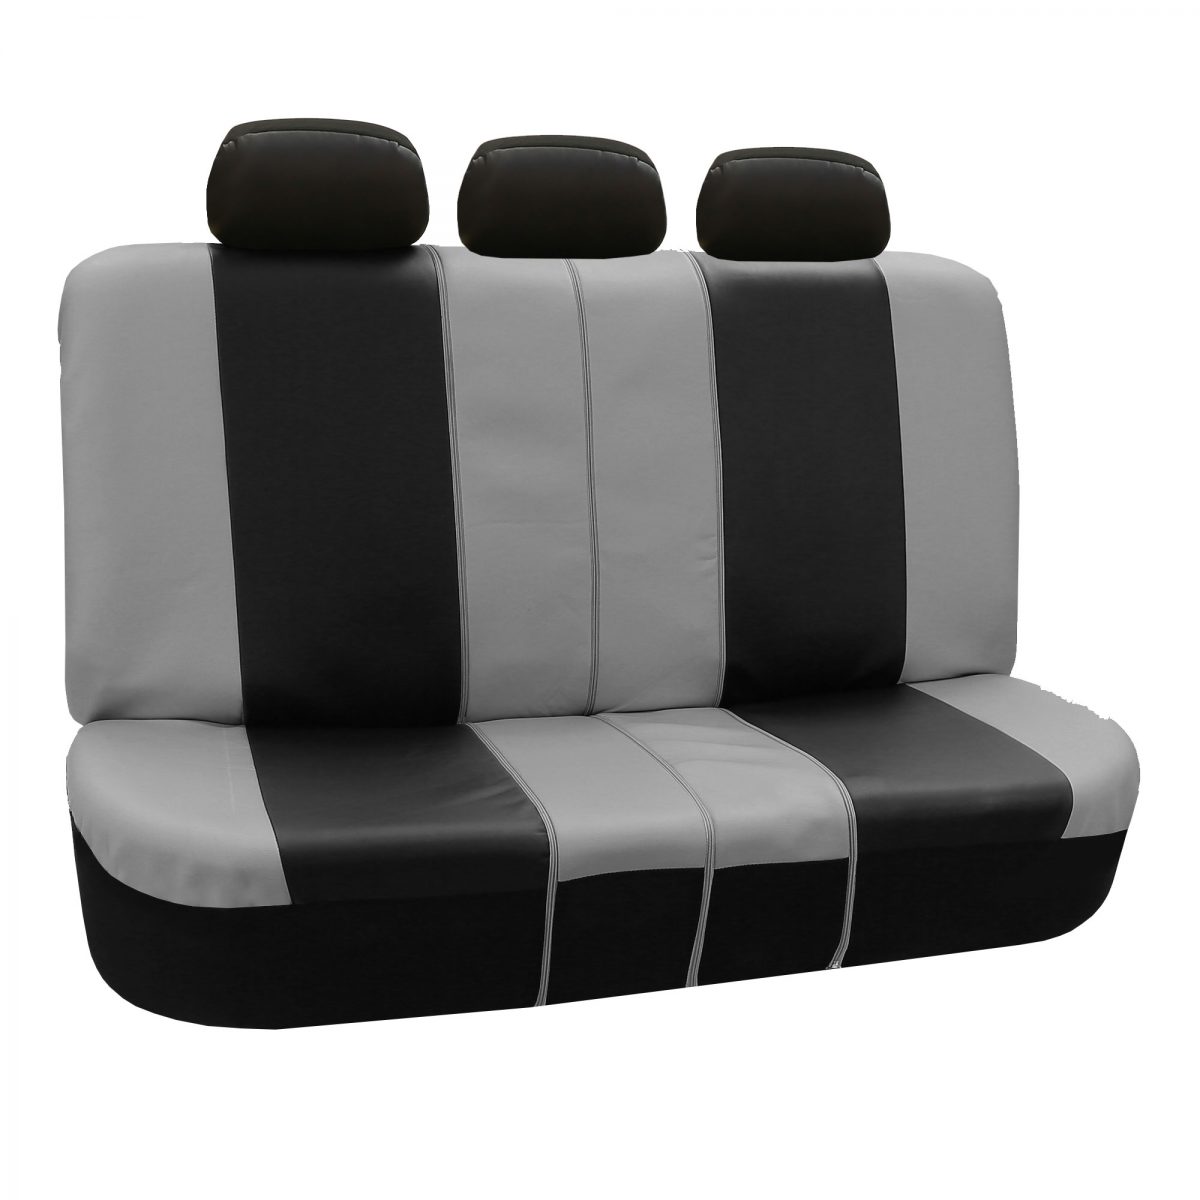 Seat covers - lowest price, More options & over $25 free shipping